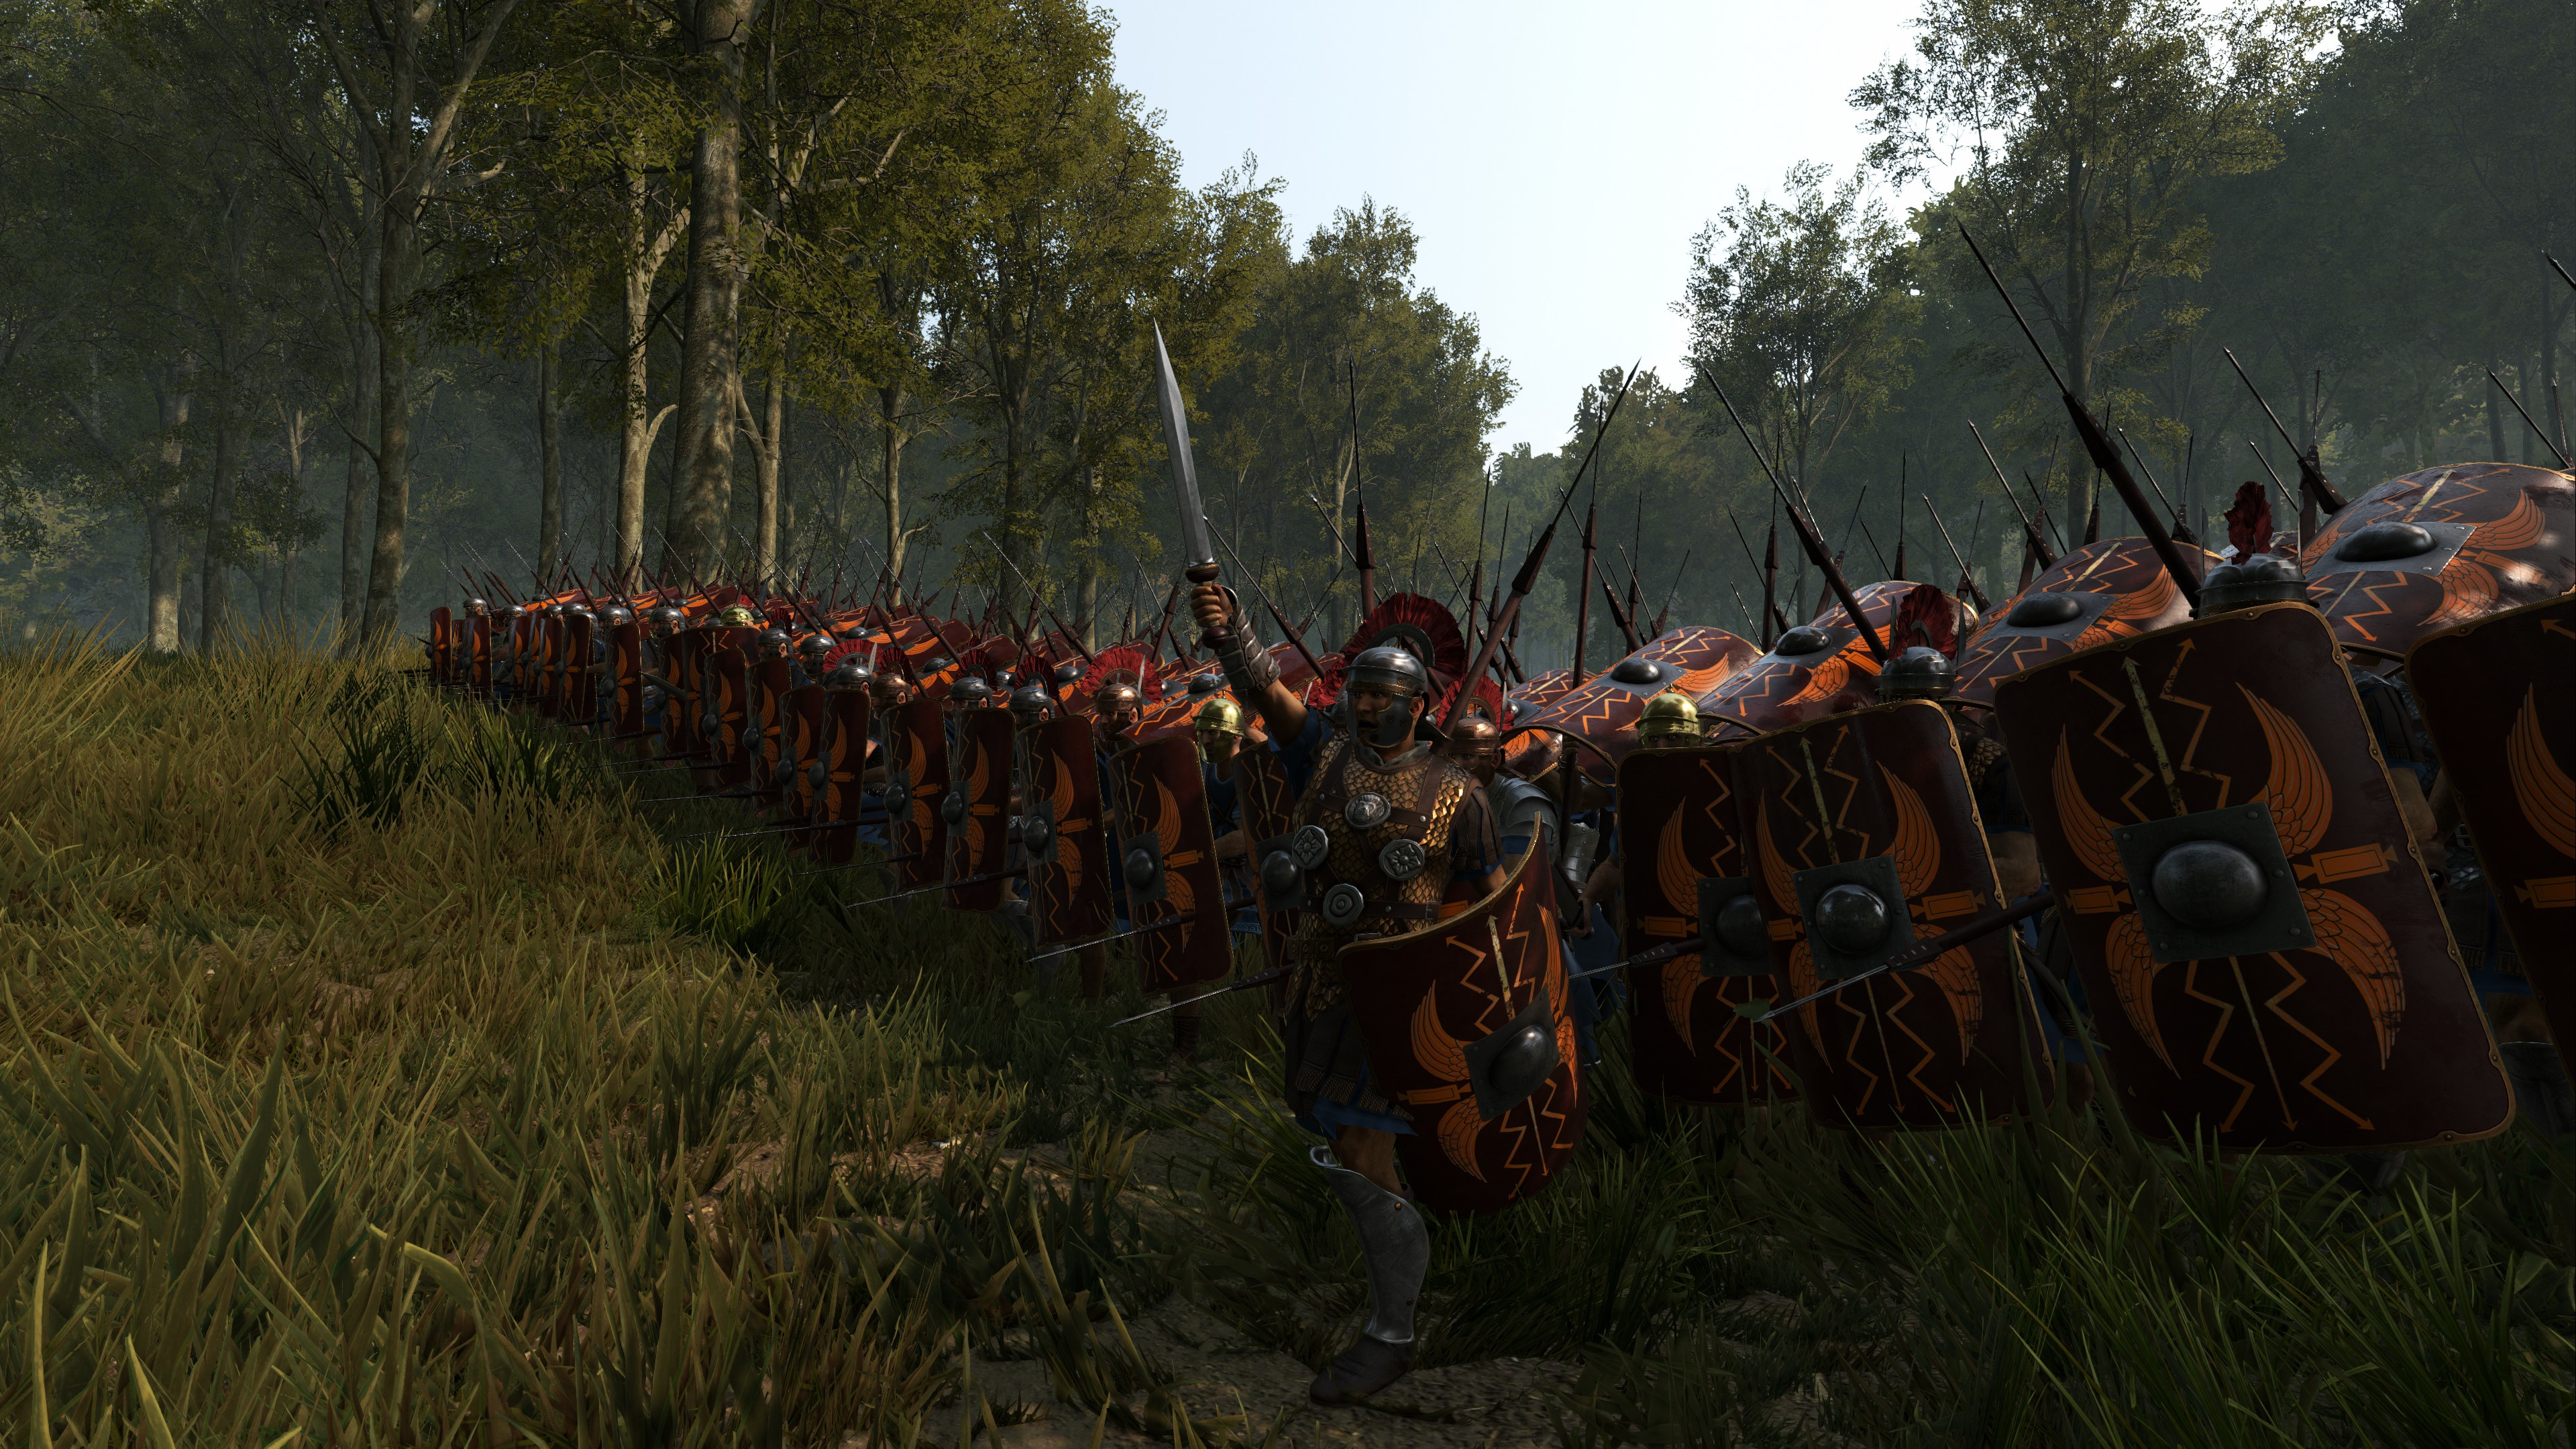 Des mods ambitieux pour Mount & Blade : Bannerlord et Crusaders Kings